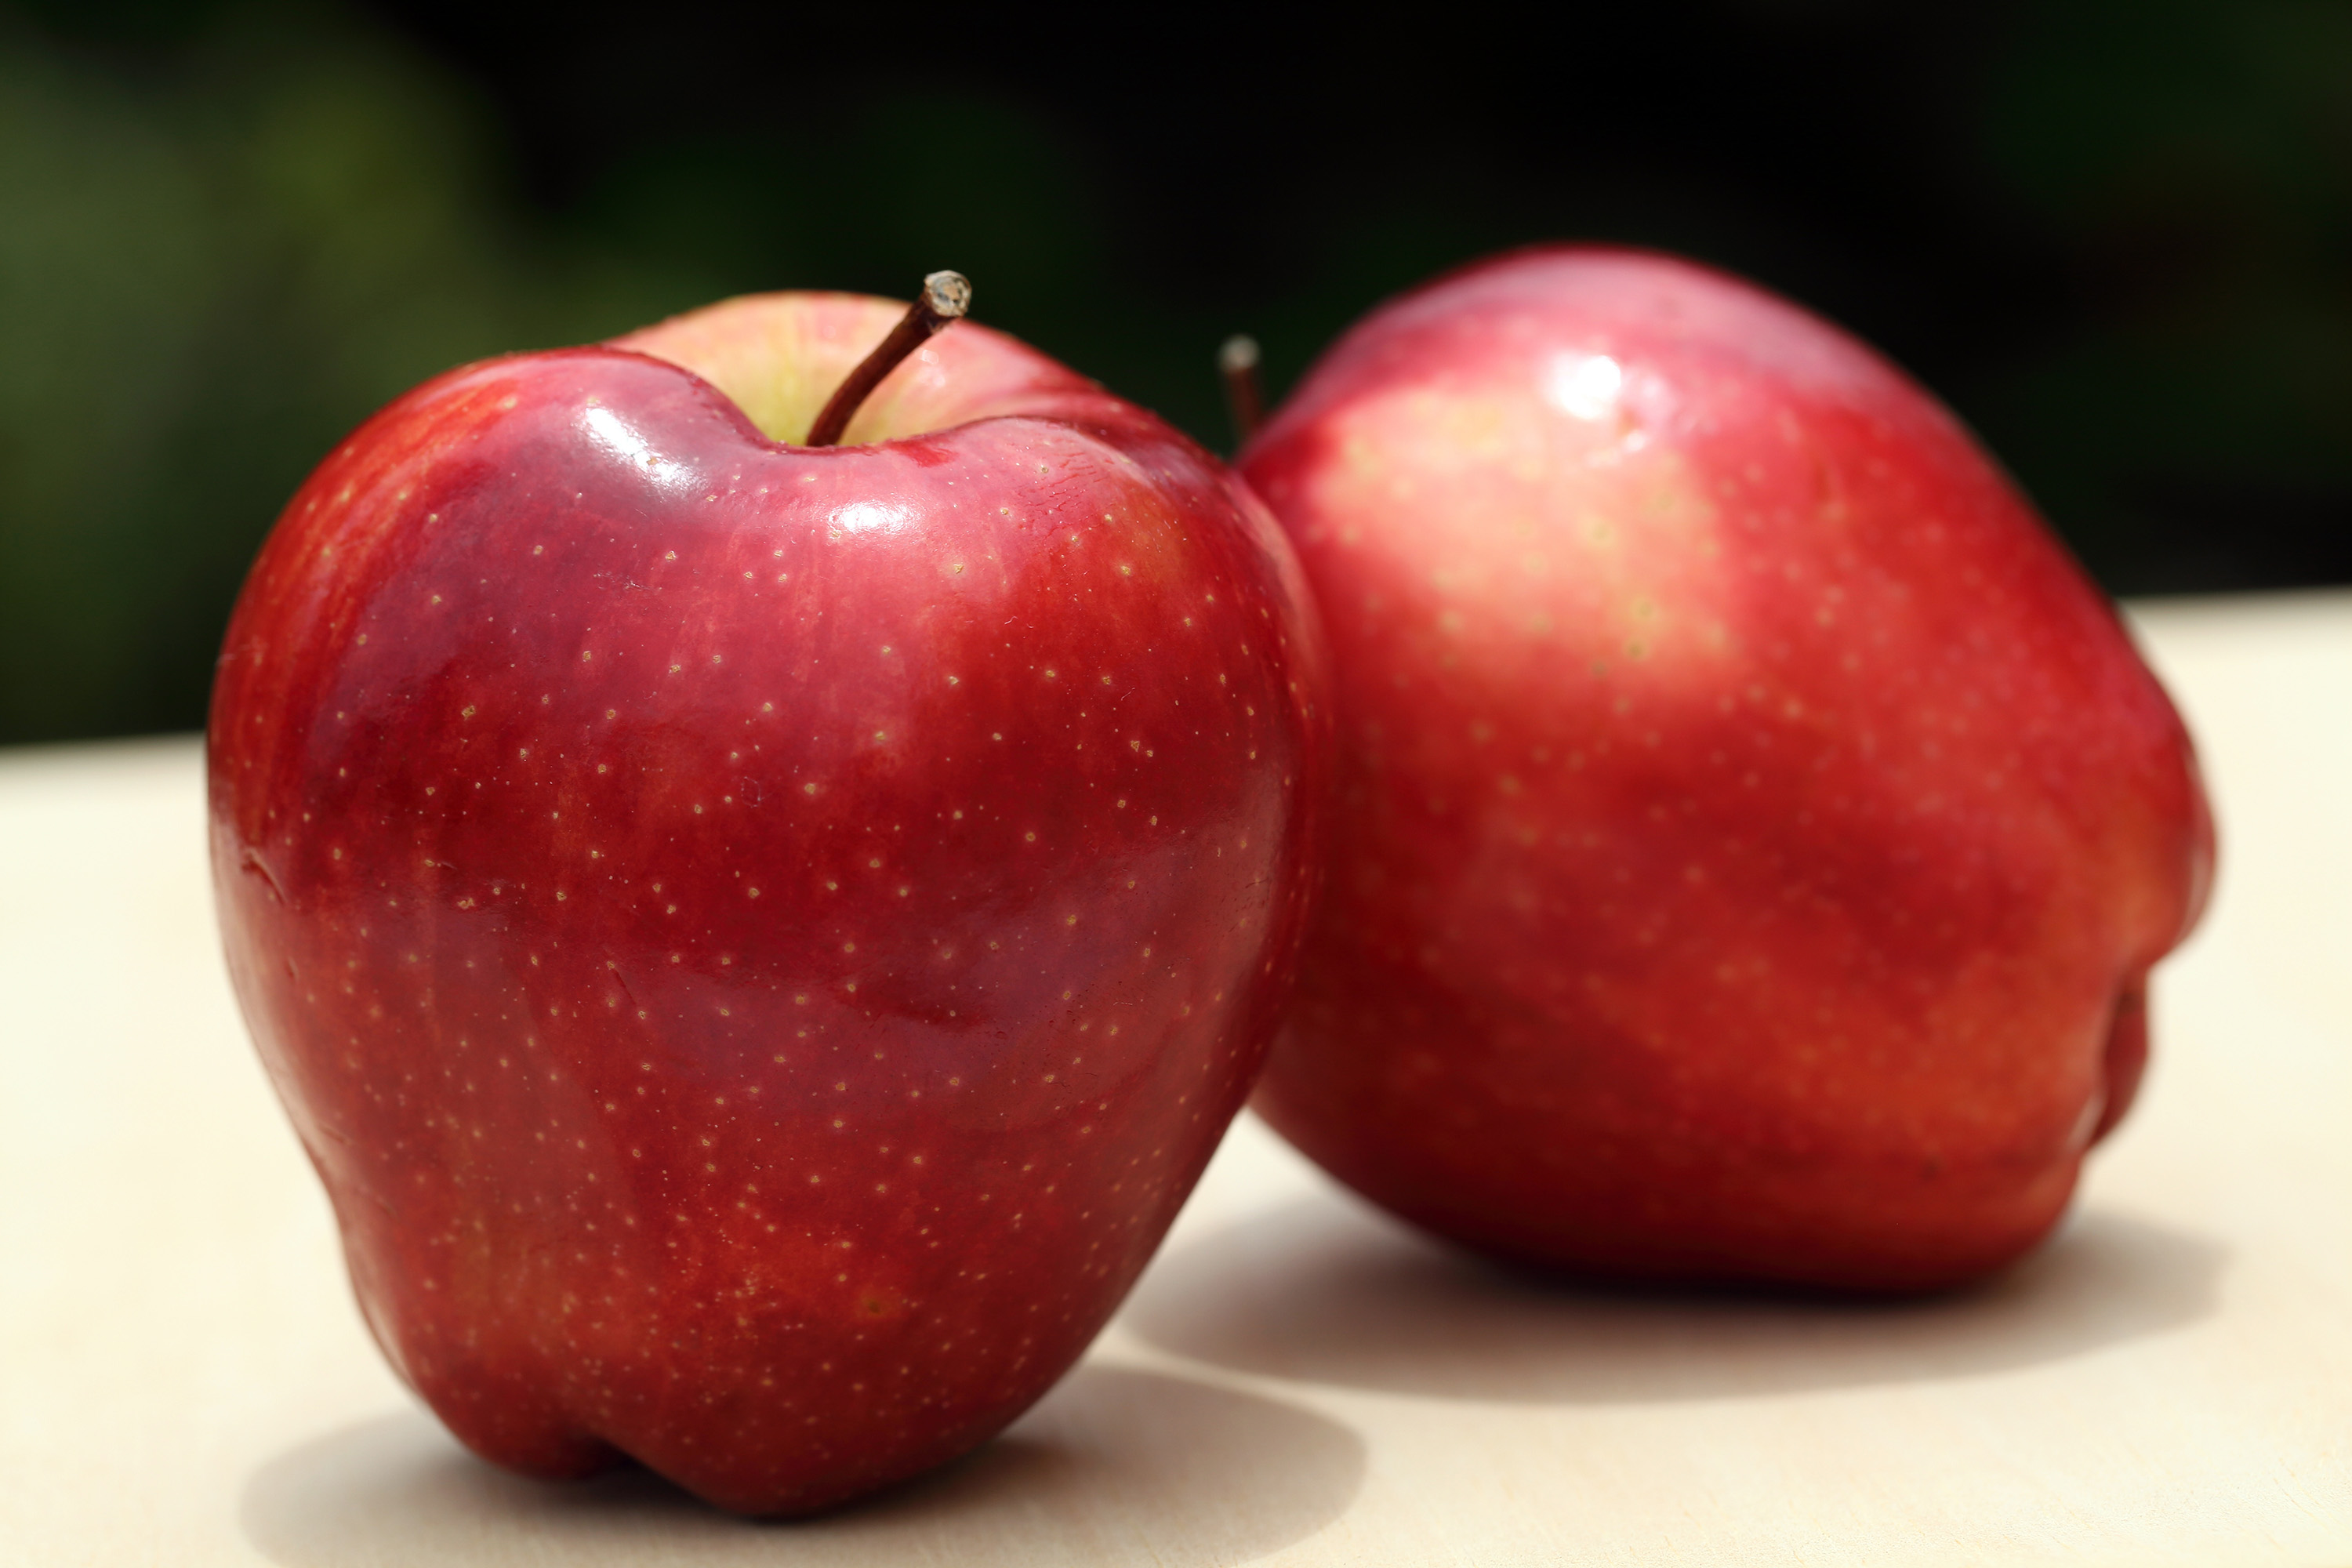 Red Delicious Apples  Local Apple Variety From Old Peru, United States of  America